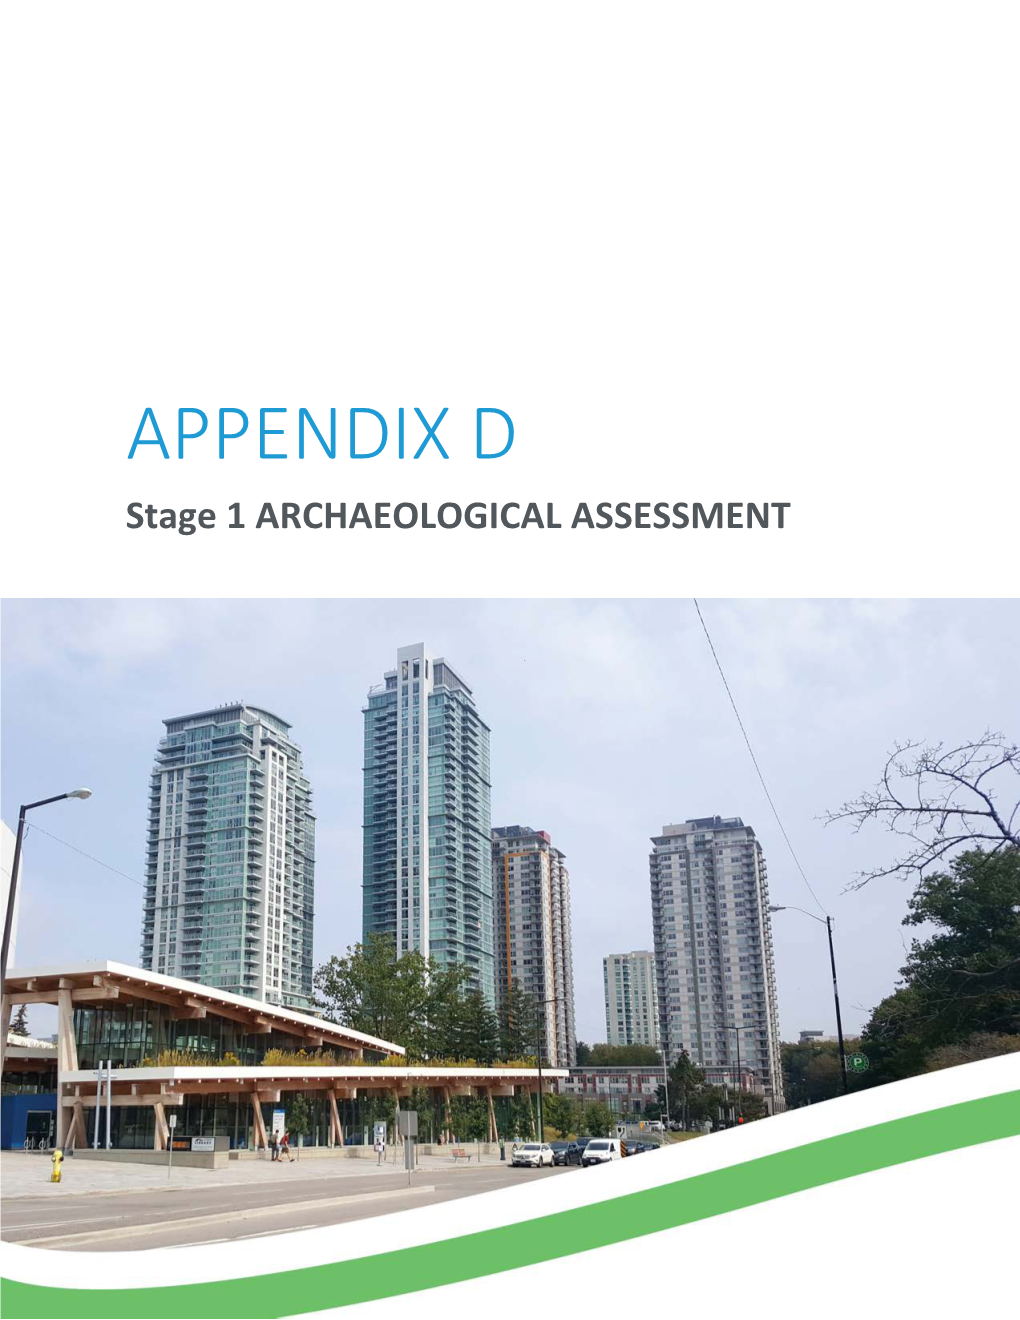 Appendix D – Stage 1 Archaeological Assessment